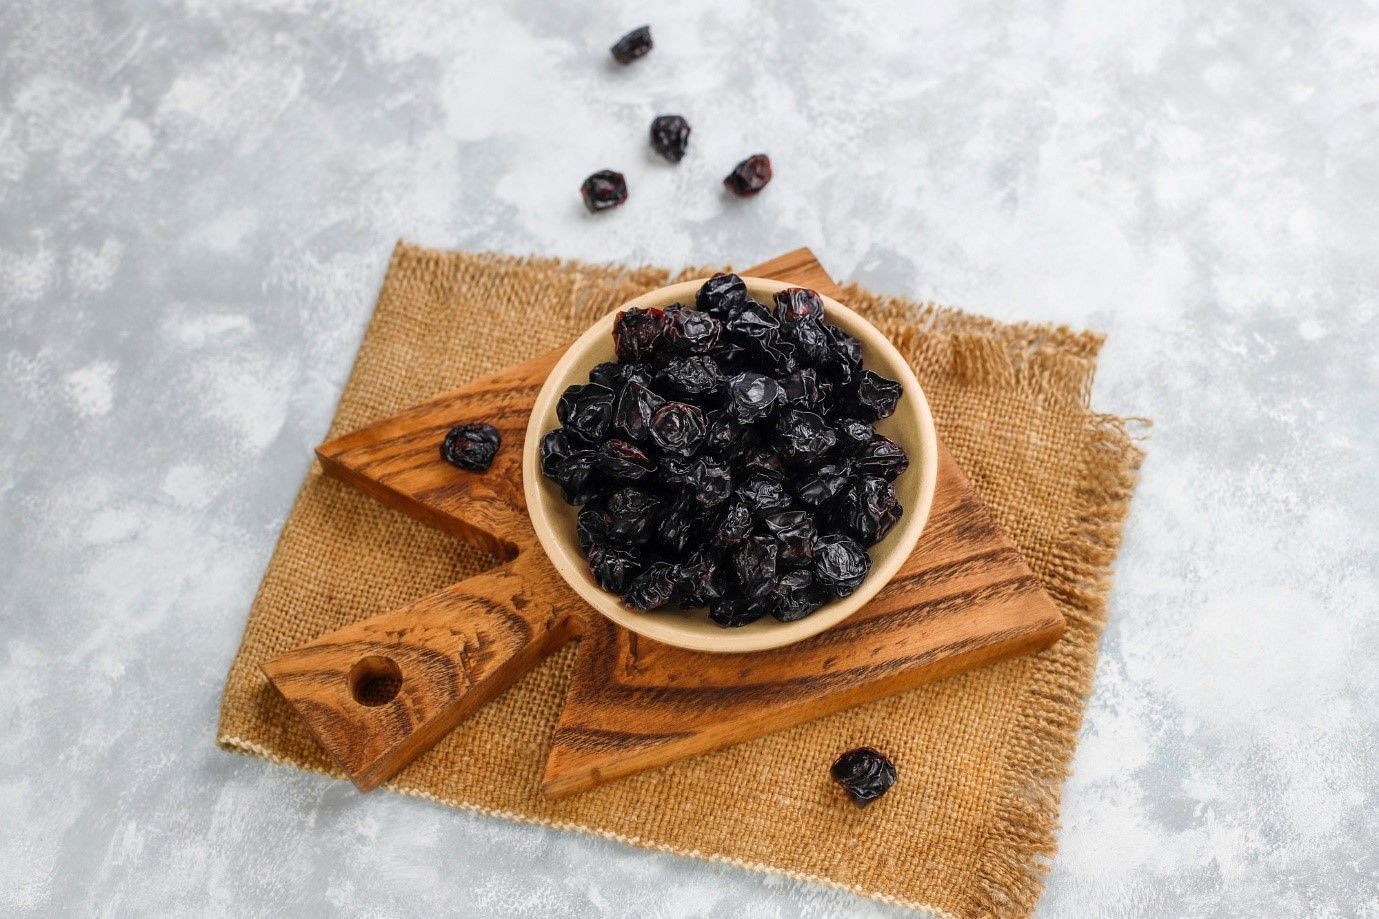 Black currants are used as a flavoring agent in many frozen desserts and bakery items as well (Image by Azerbaijan_stockers on Freepik)